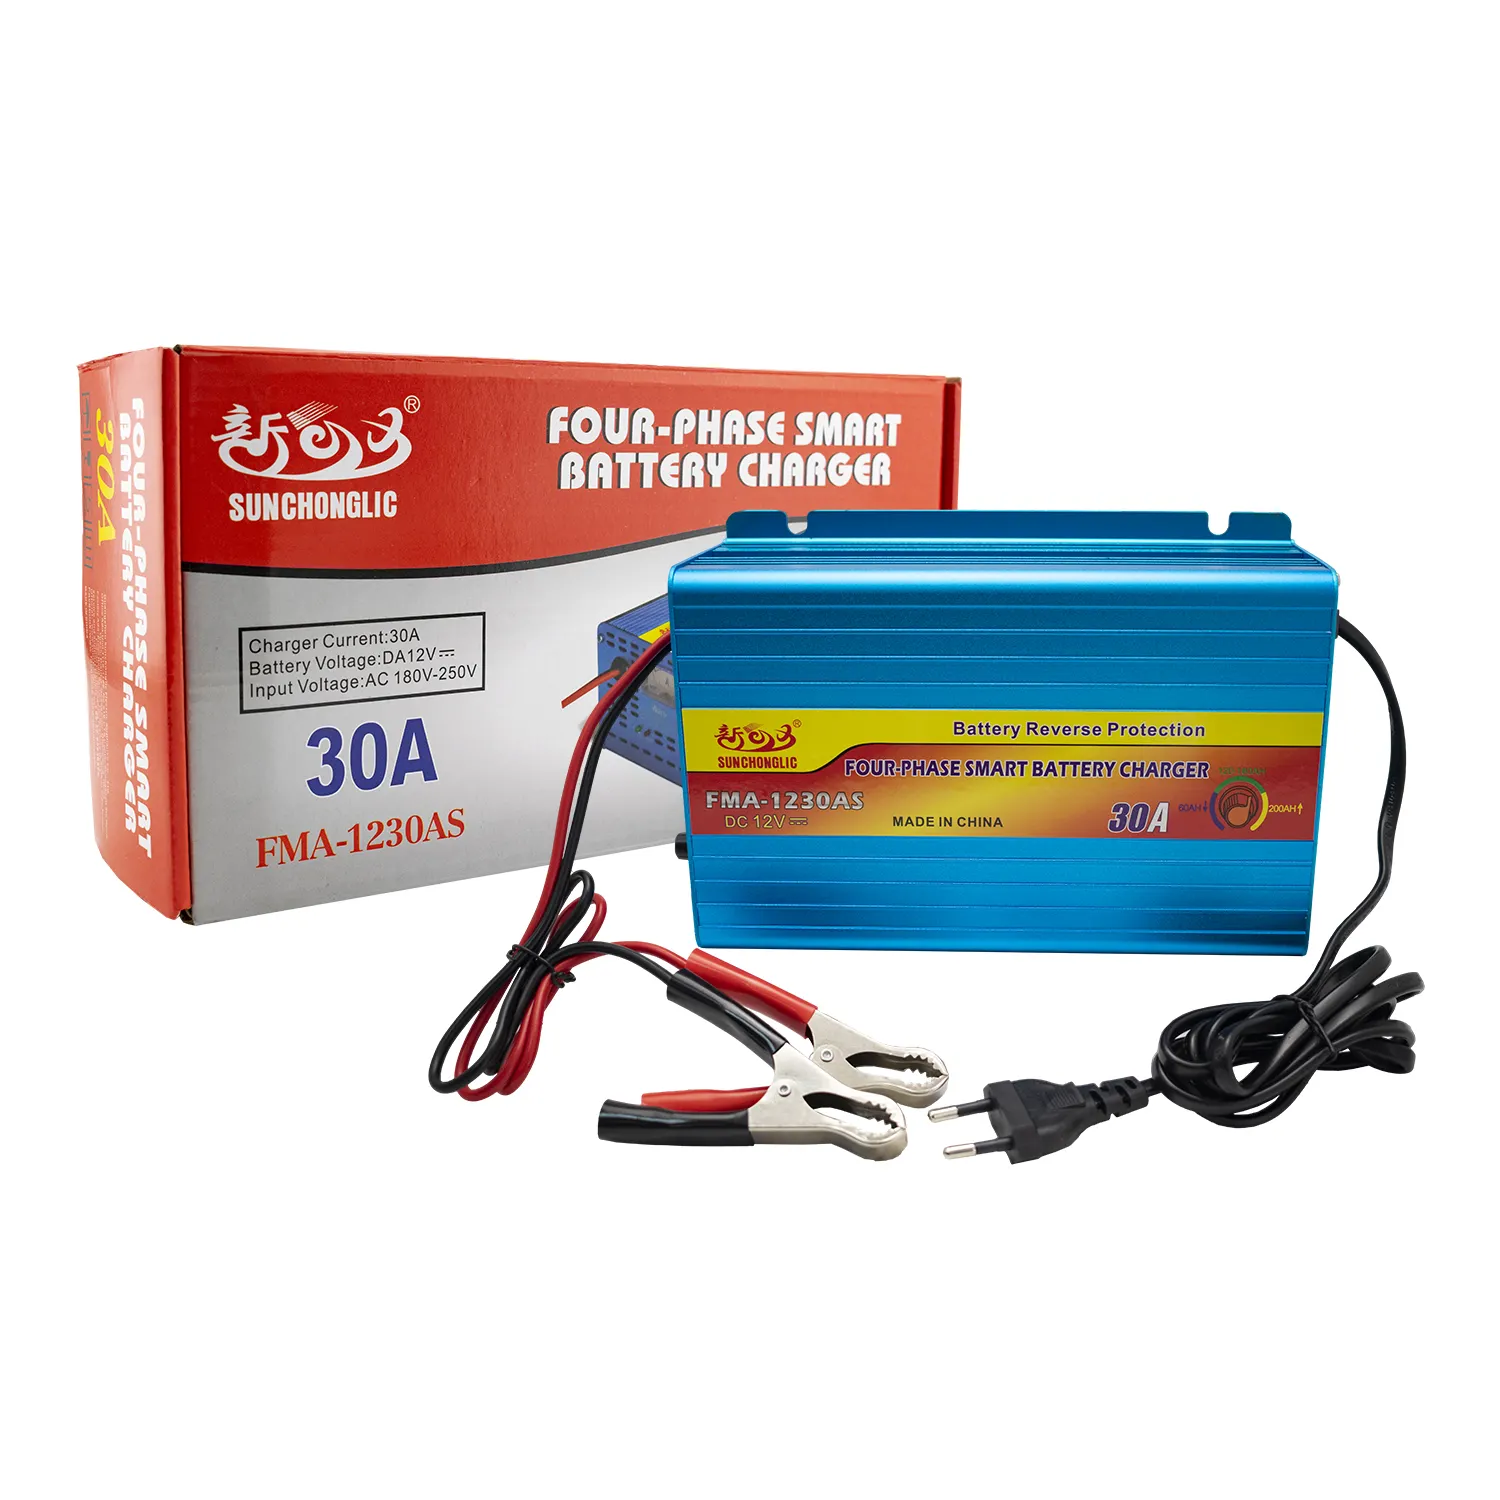 Sunchonglic intelligent four-phase 12V 30A car lead acid battery charger 12 volt 30 amp